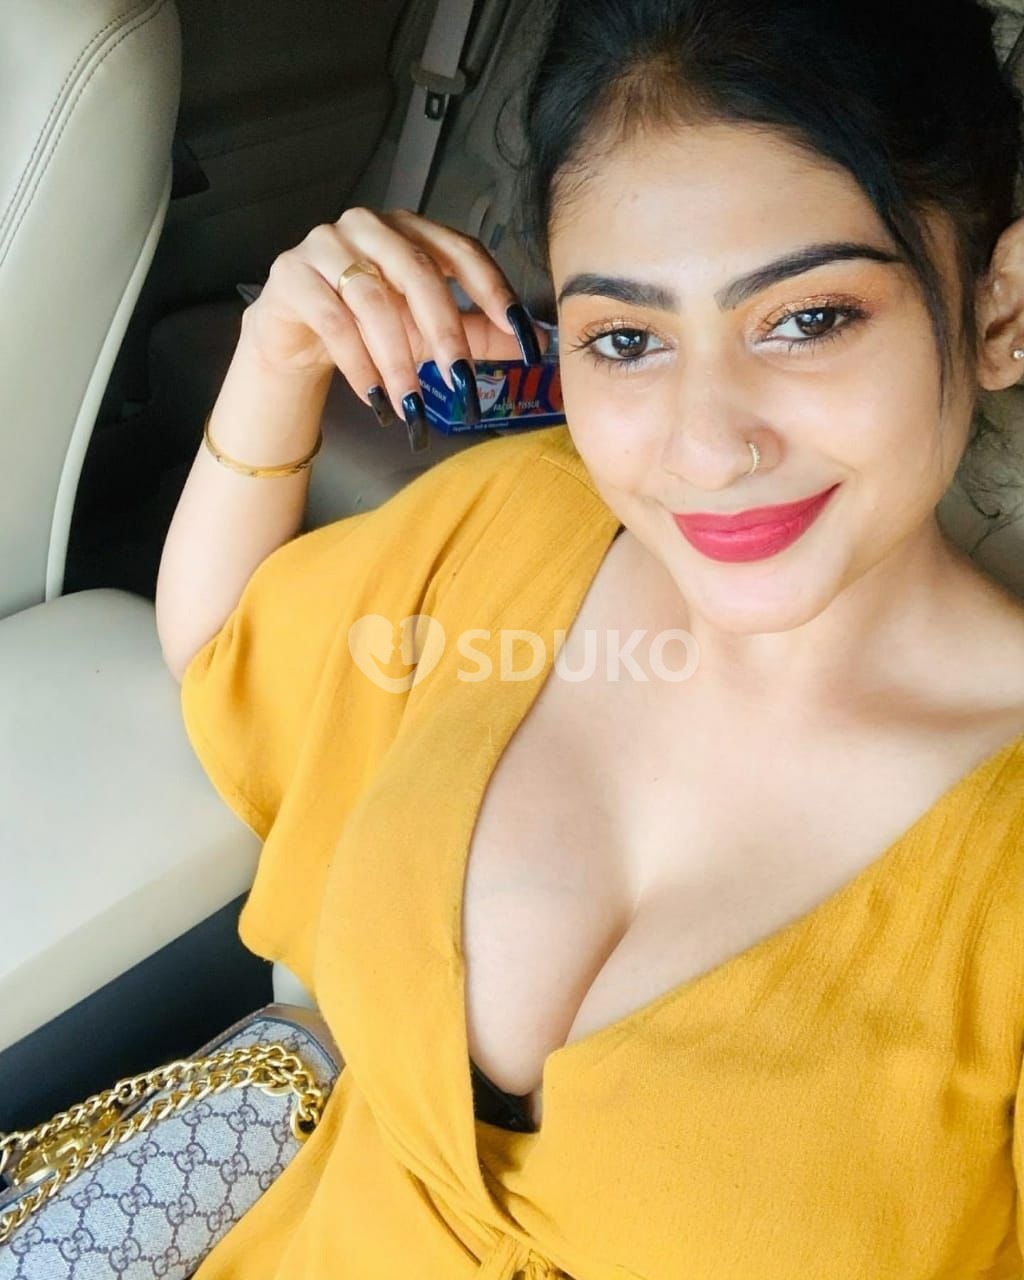 Gachibowli 92564/71656 now available call girl full safe and secure without condom sucking kissing all services availabl